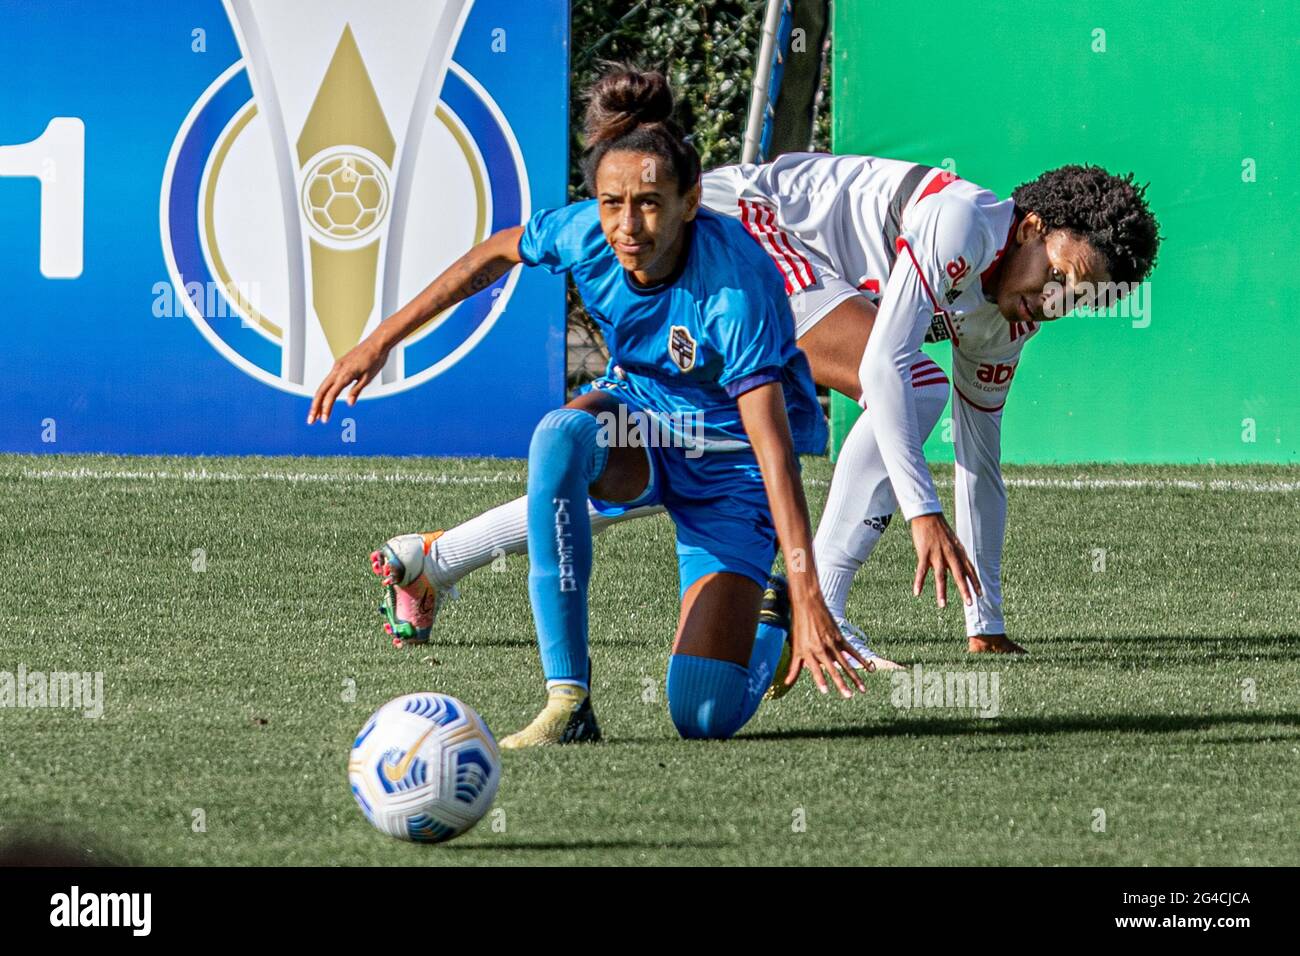 https://c8.alamy.com/comp/2G4CJCA/cotia-brazil-20th-june-2021-marcela-in-the-match-between-so-paulo-and-real-braslia-valid-for-the-14th-round-of-the-brazilian-soccer-championship-serie-a1-women-of-2021-held-at-cfa-cotia-this-sunday-20-credit-van-camposfotoarenaalamy-live-news-2G4CJCA.jpg